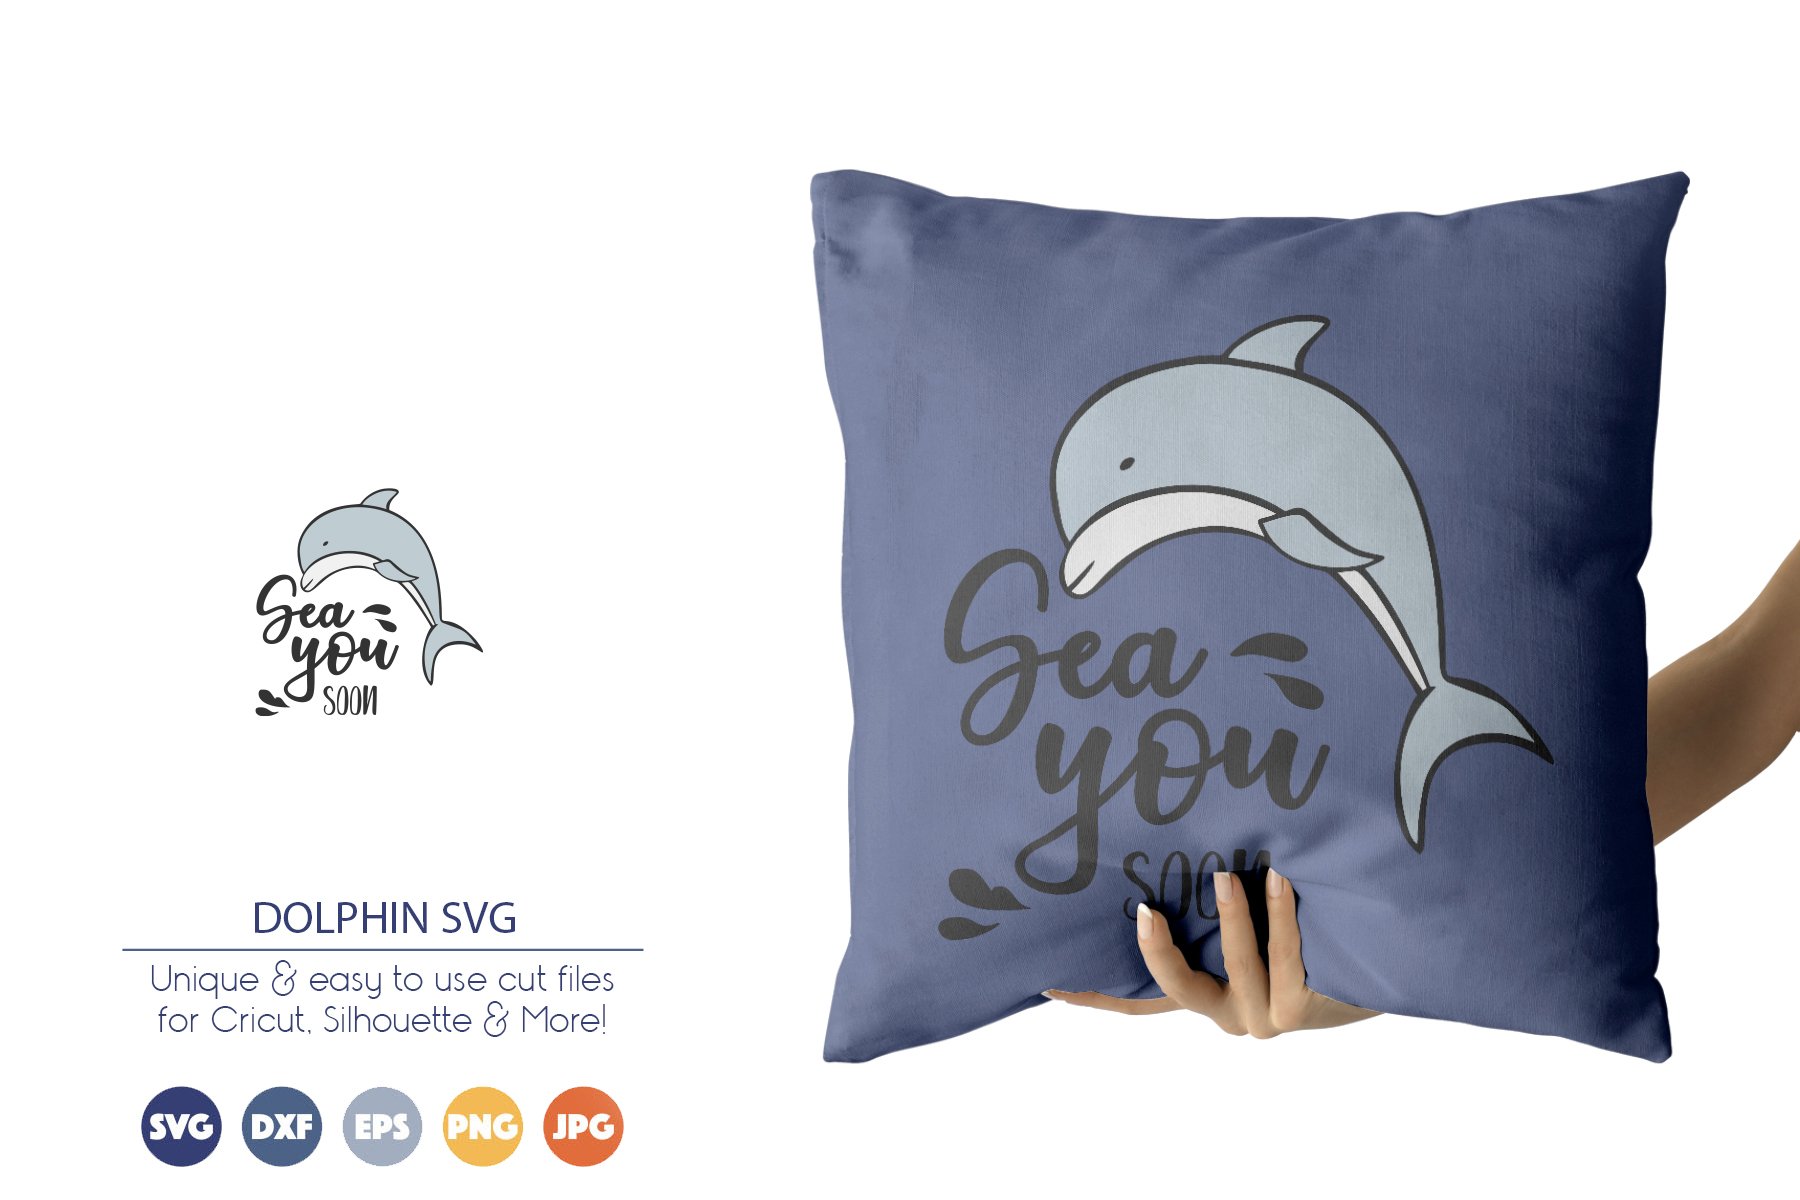 A dolphin on a pillow.